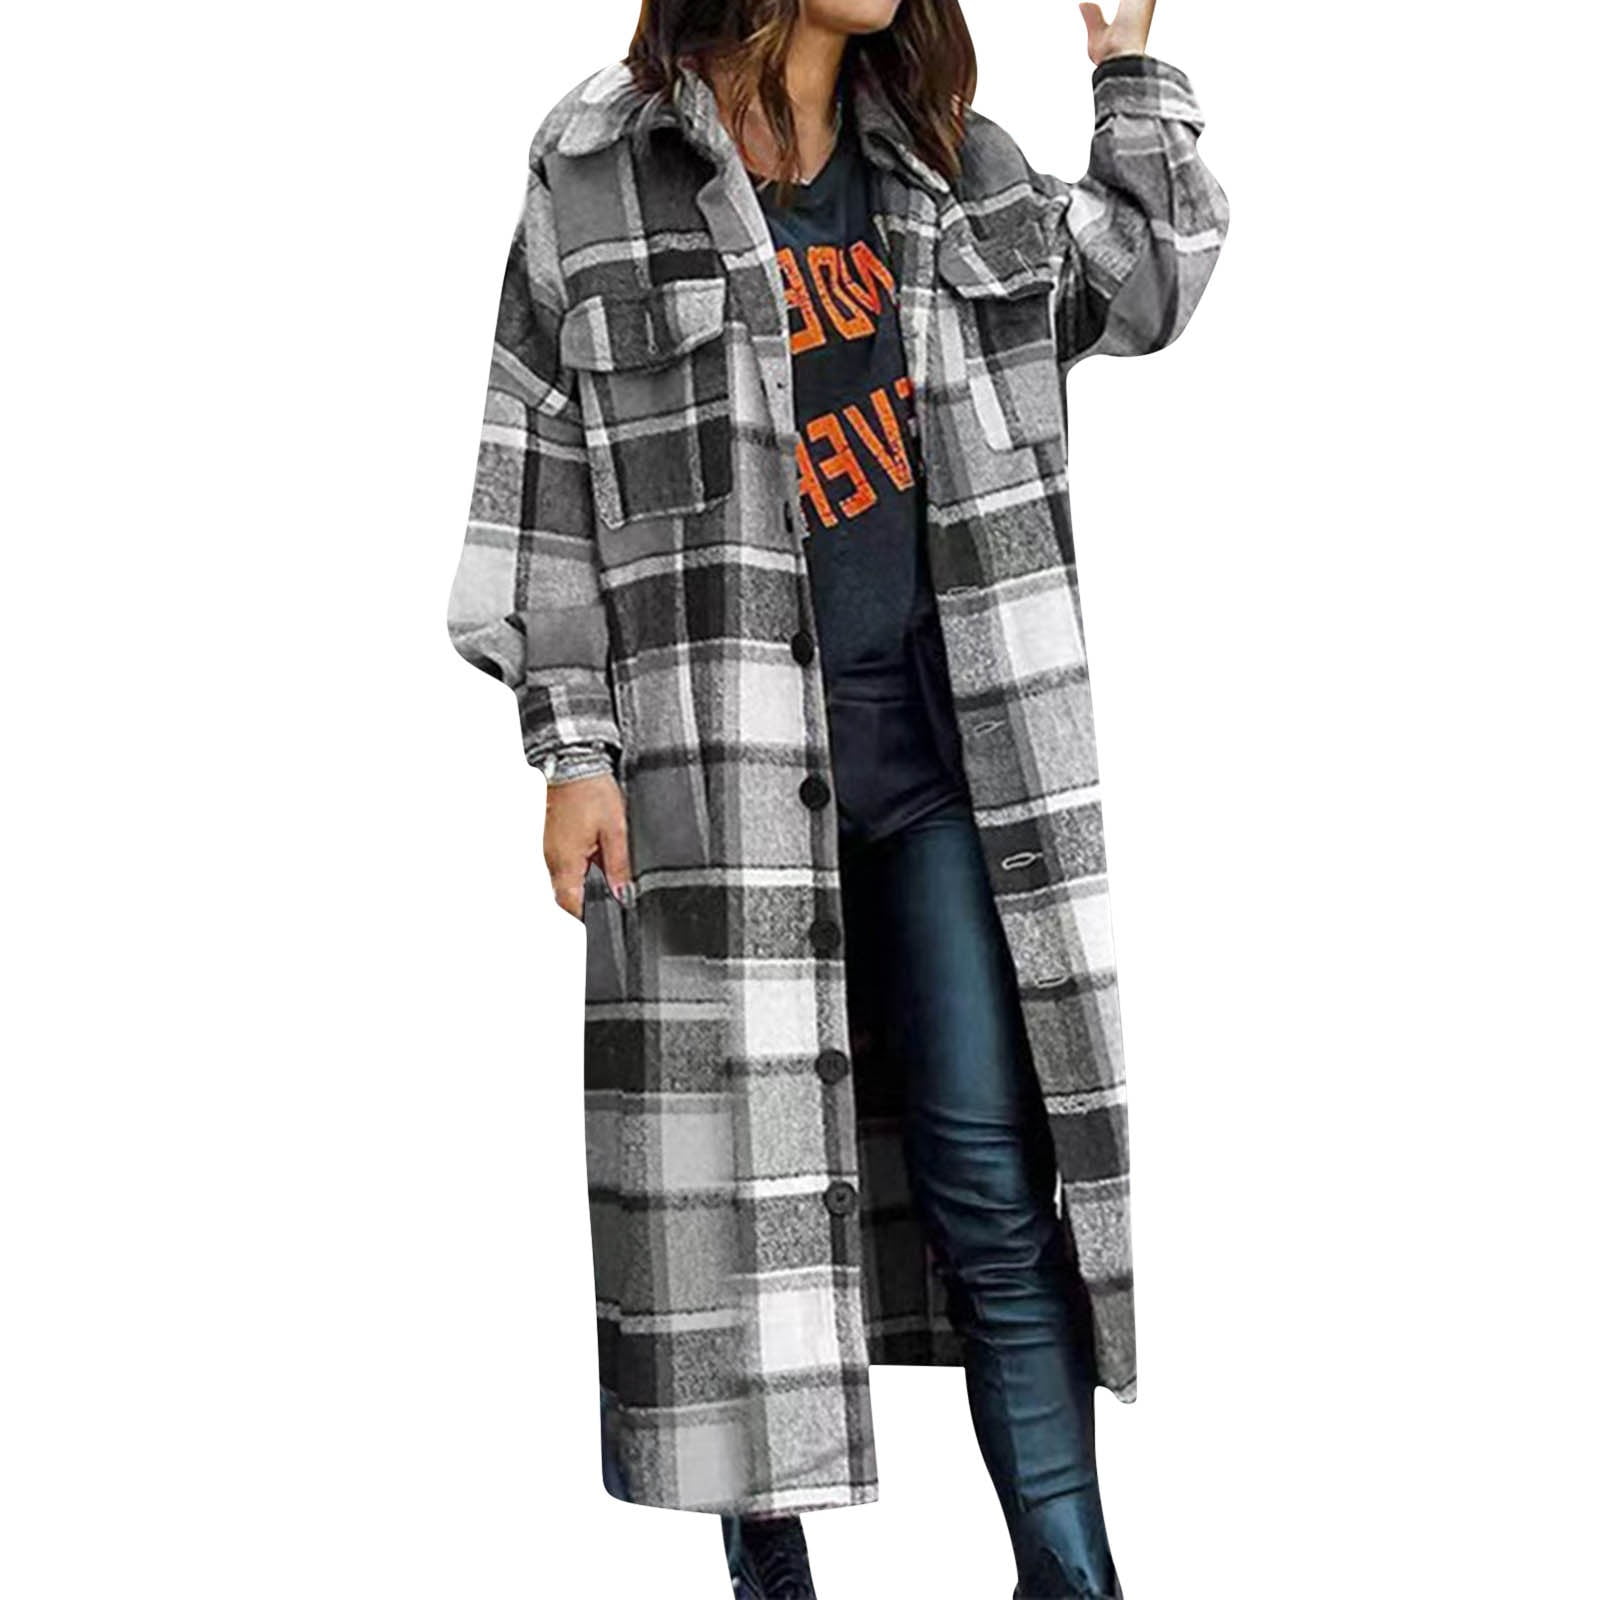 Women Fashion Plaid Print Outwear Winter Long Sleeve Lapel Long Jacket  Trench Coat With Mauve Jacket With Hood Wool Zip up Jacket Nonstop Jacket  Women